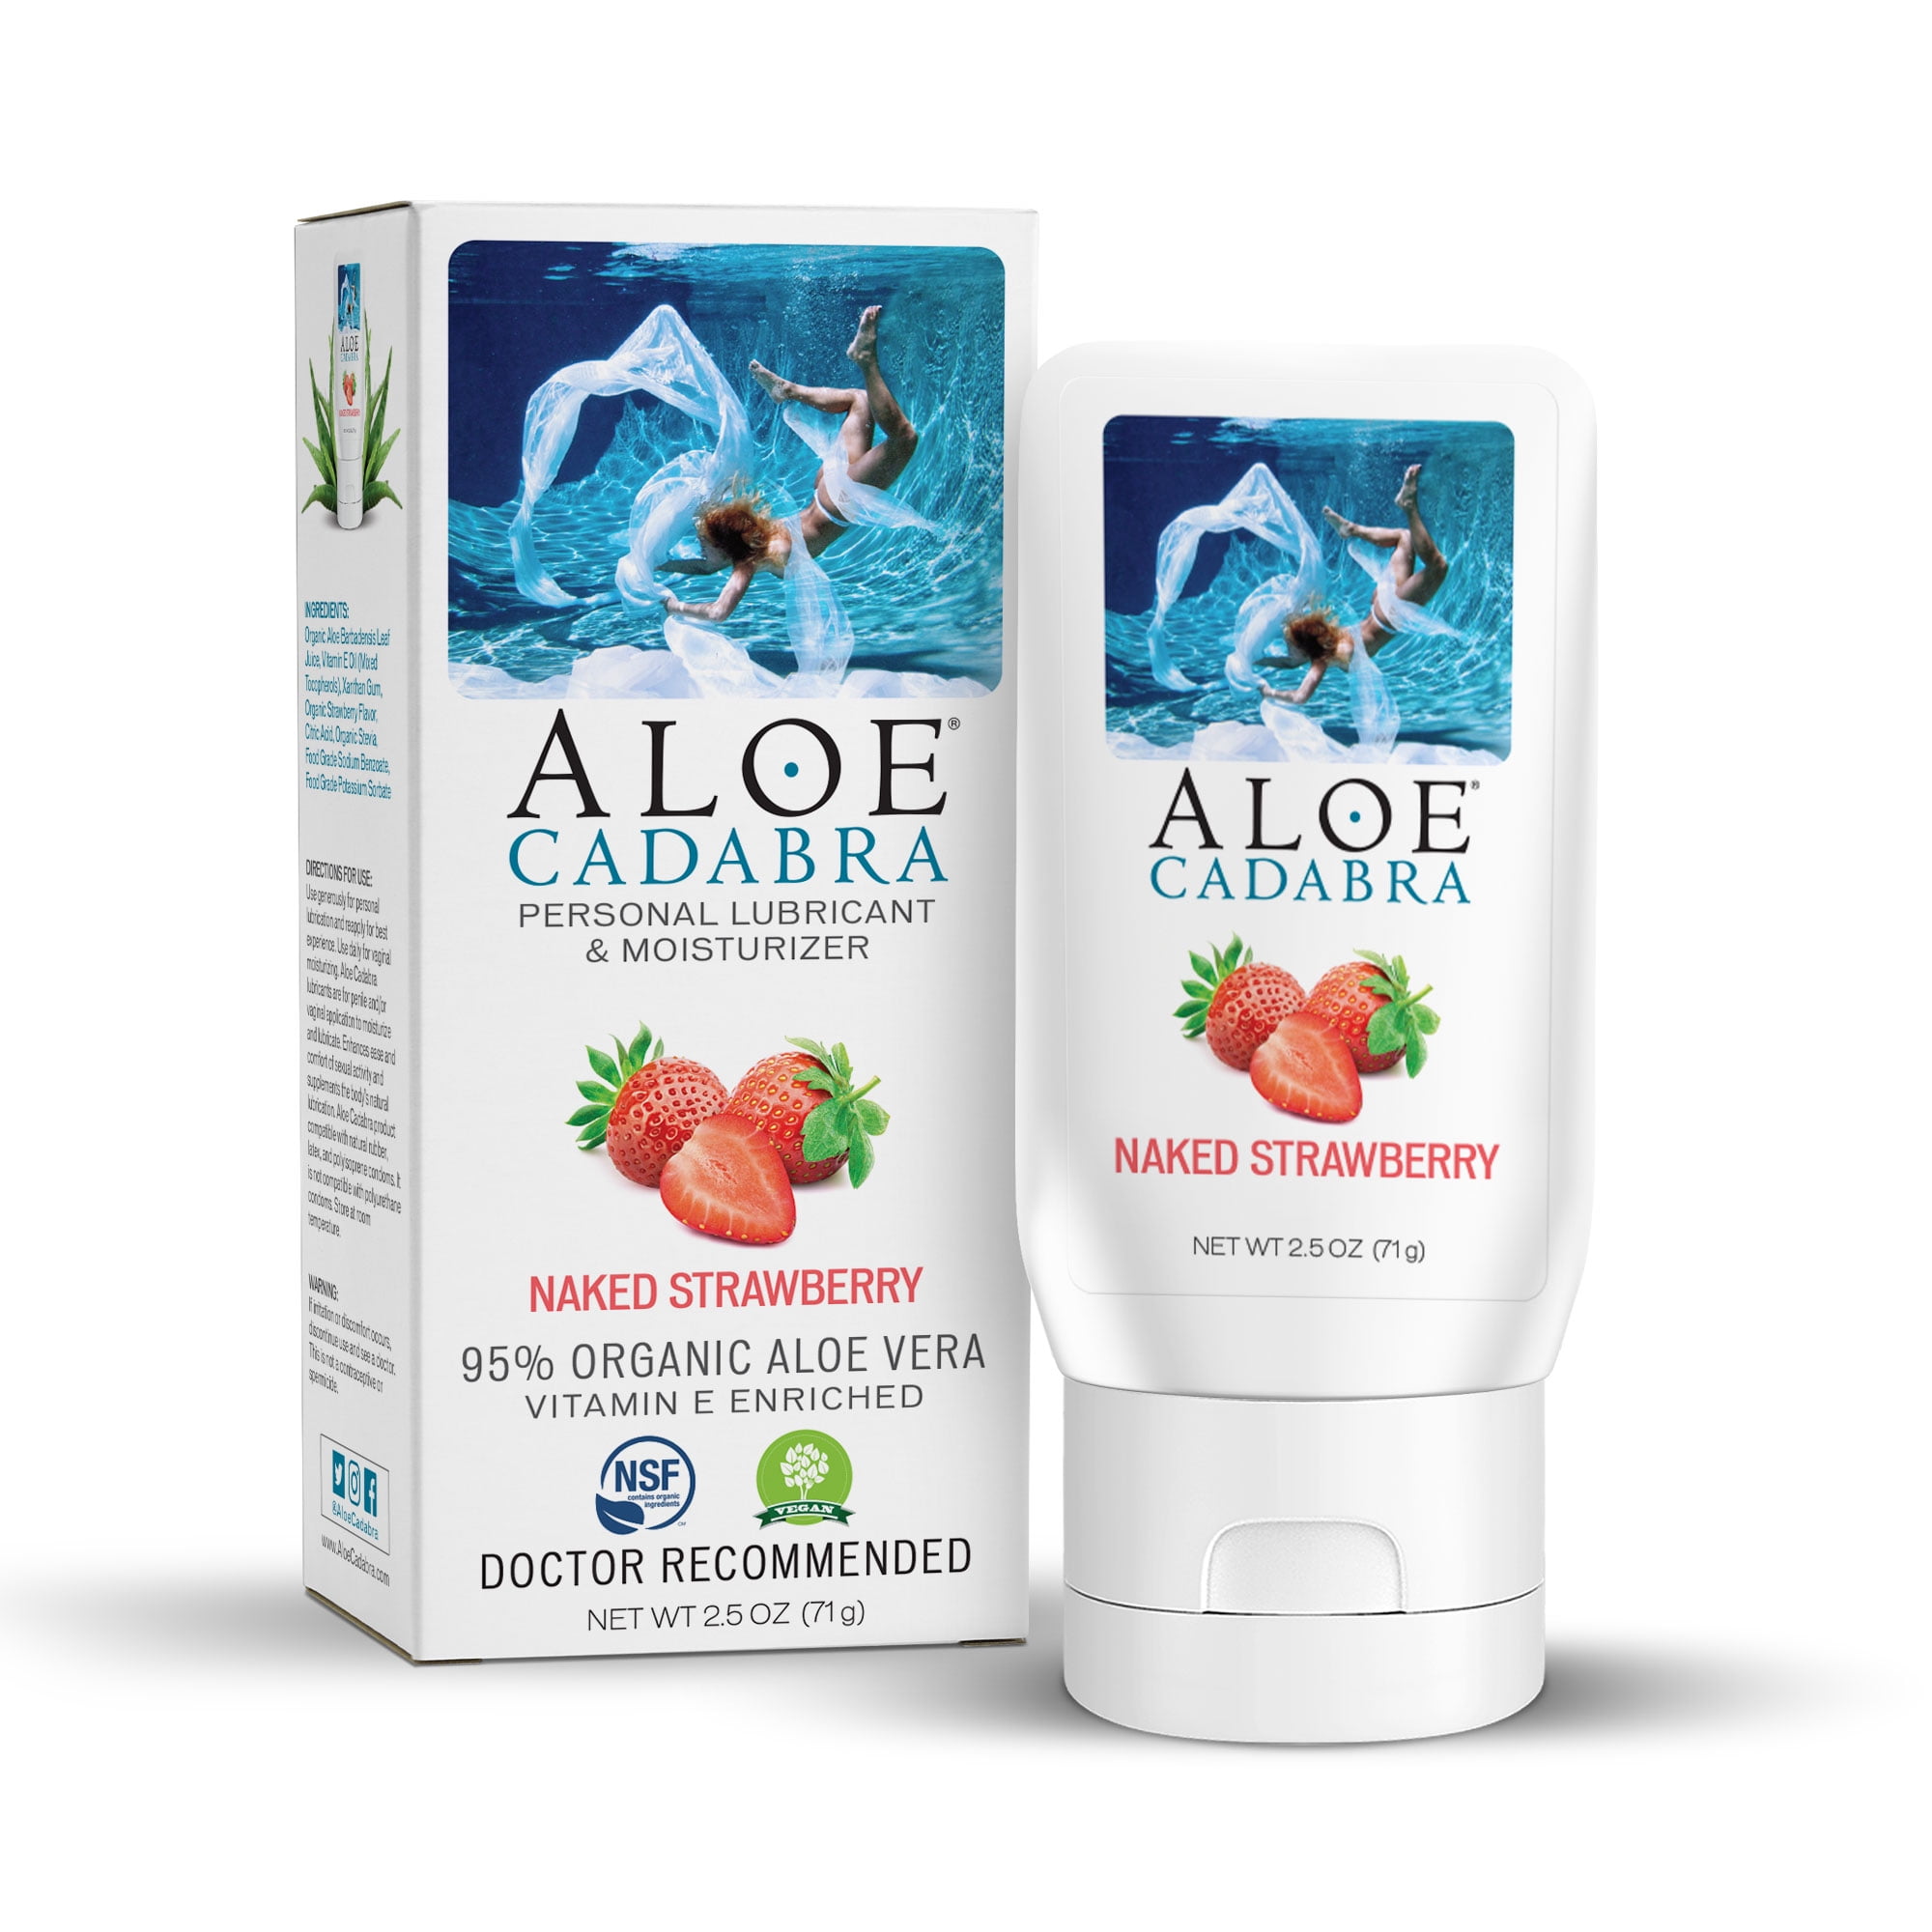 Aloe Cadabra Organic Natural Personal Lube Sex Vegan Edible Naked Strawberry 2.5oz image picture